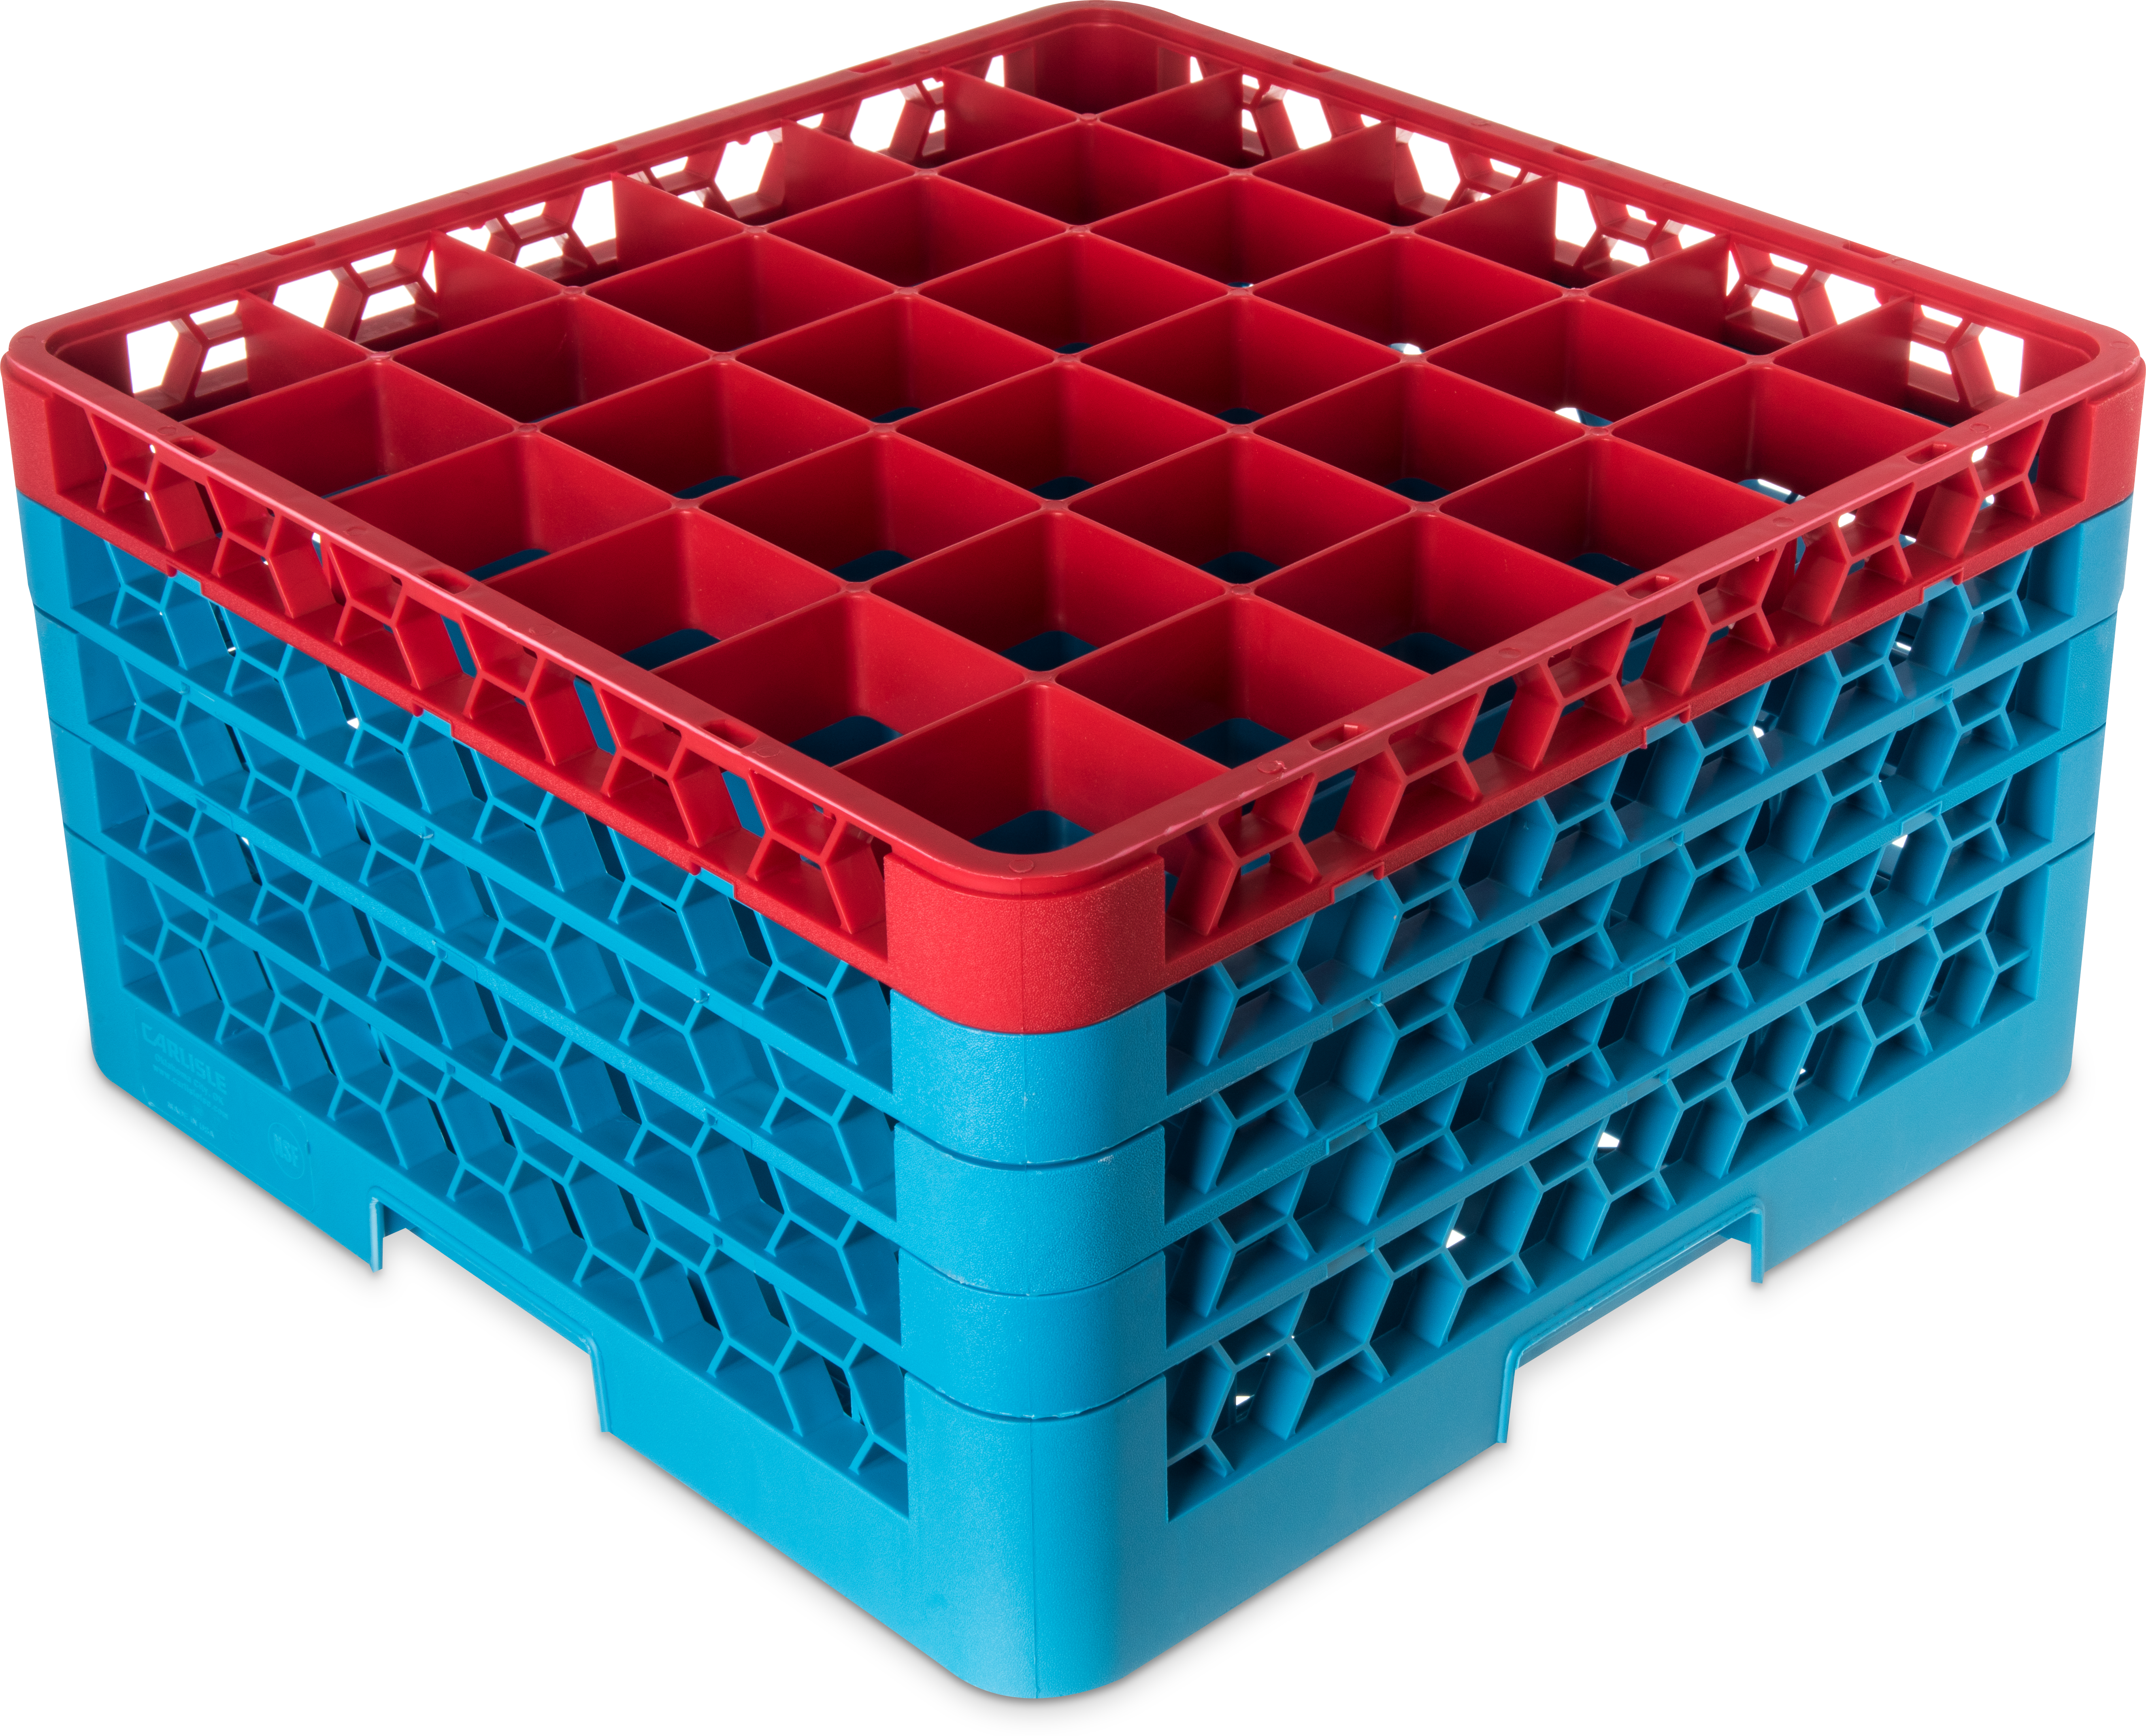 OptiClean 36 Compartment Glass Rack with 4 Extenders 10.3 - Red-Carlisle Blue